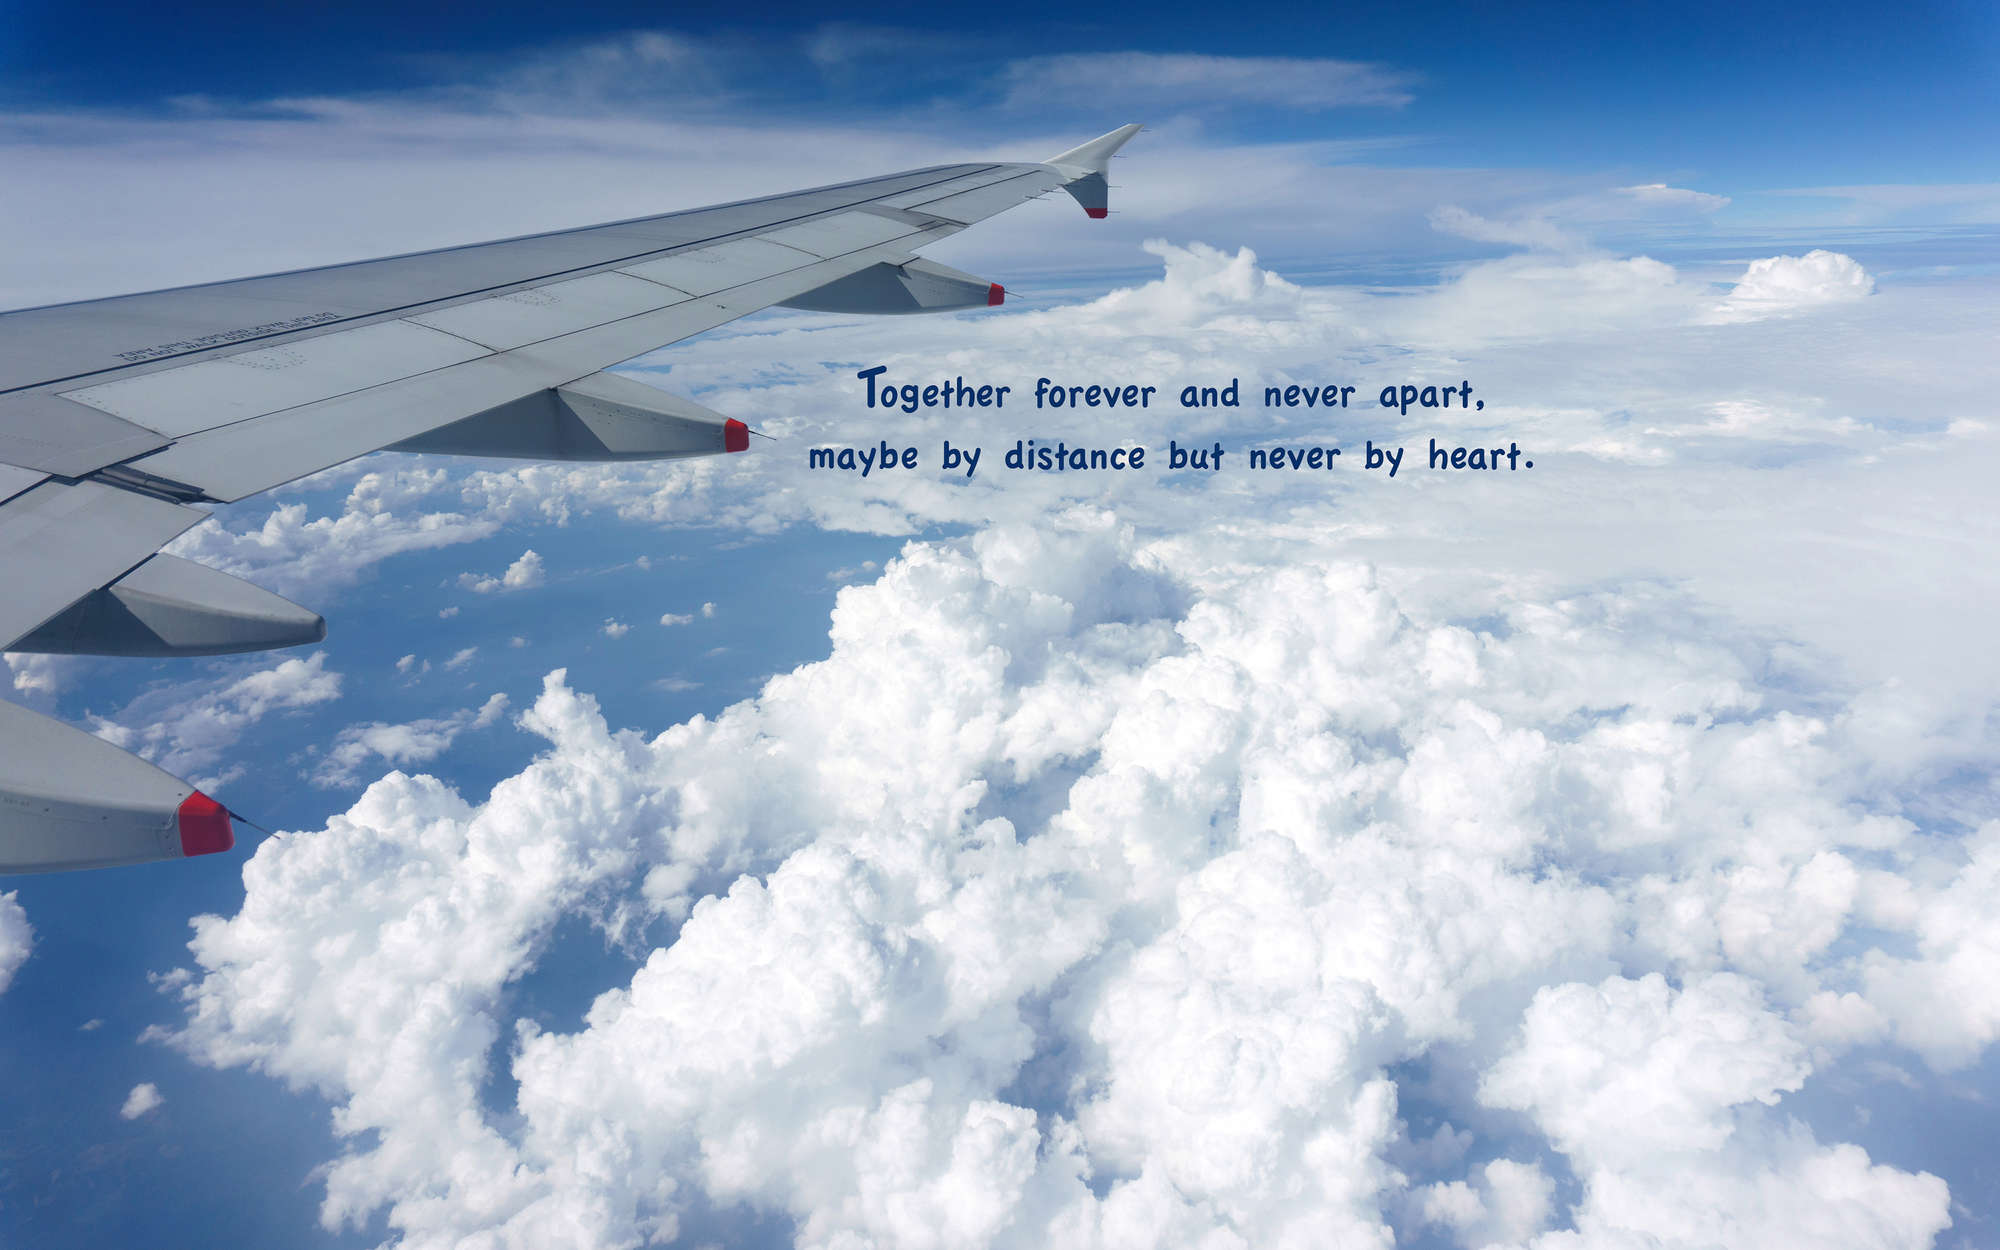             Photo wallpaper Airplane above the clouds with lettering - Matt smooth fleece
        